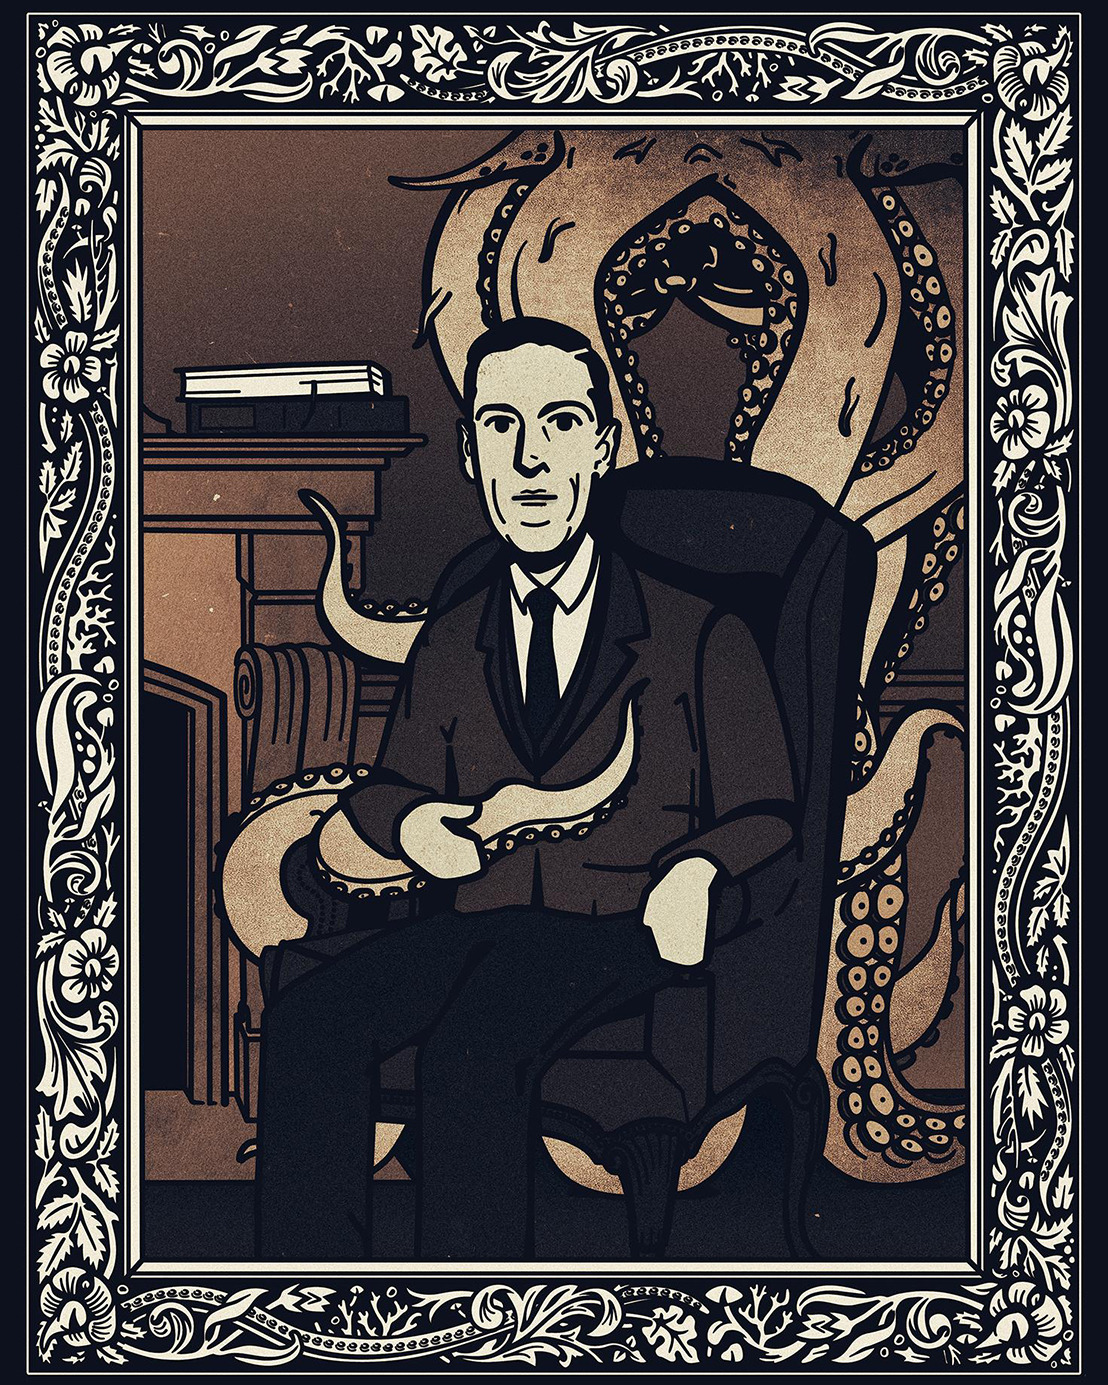 hi there, I’m Selin Arisoy (art director/illustrator) here is a gif project of mine about Lovecraft; H.P. Lovecraft - The Complete Fiction cover http://nocter.tumblr.com/post/167157793142 — Immediately post your art to a topic and get feedback. Join...